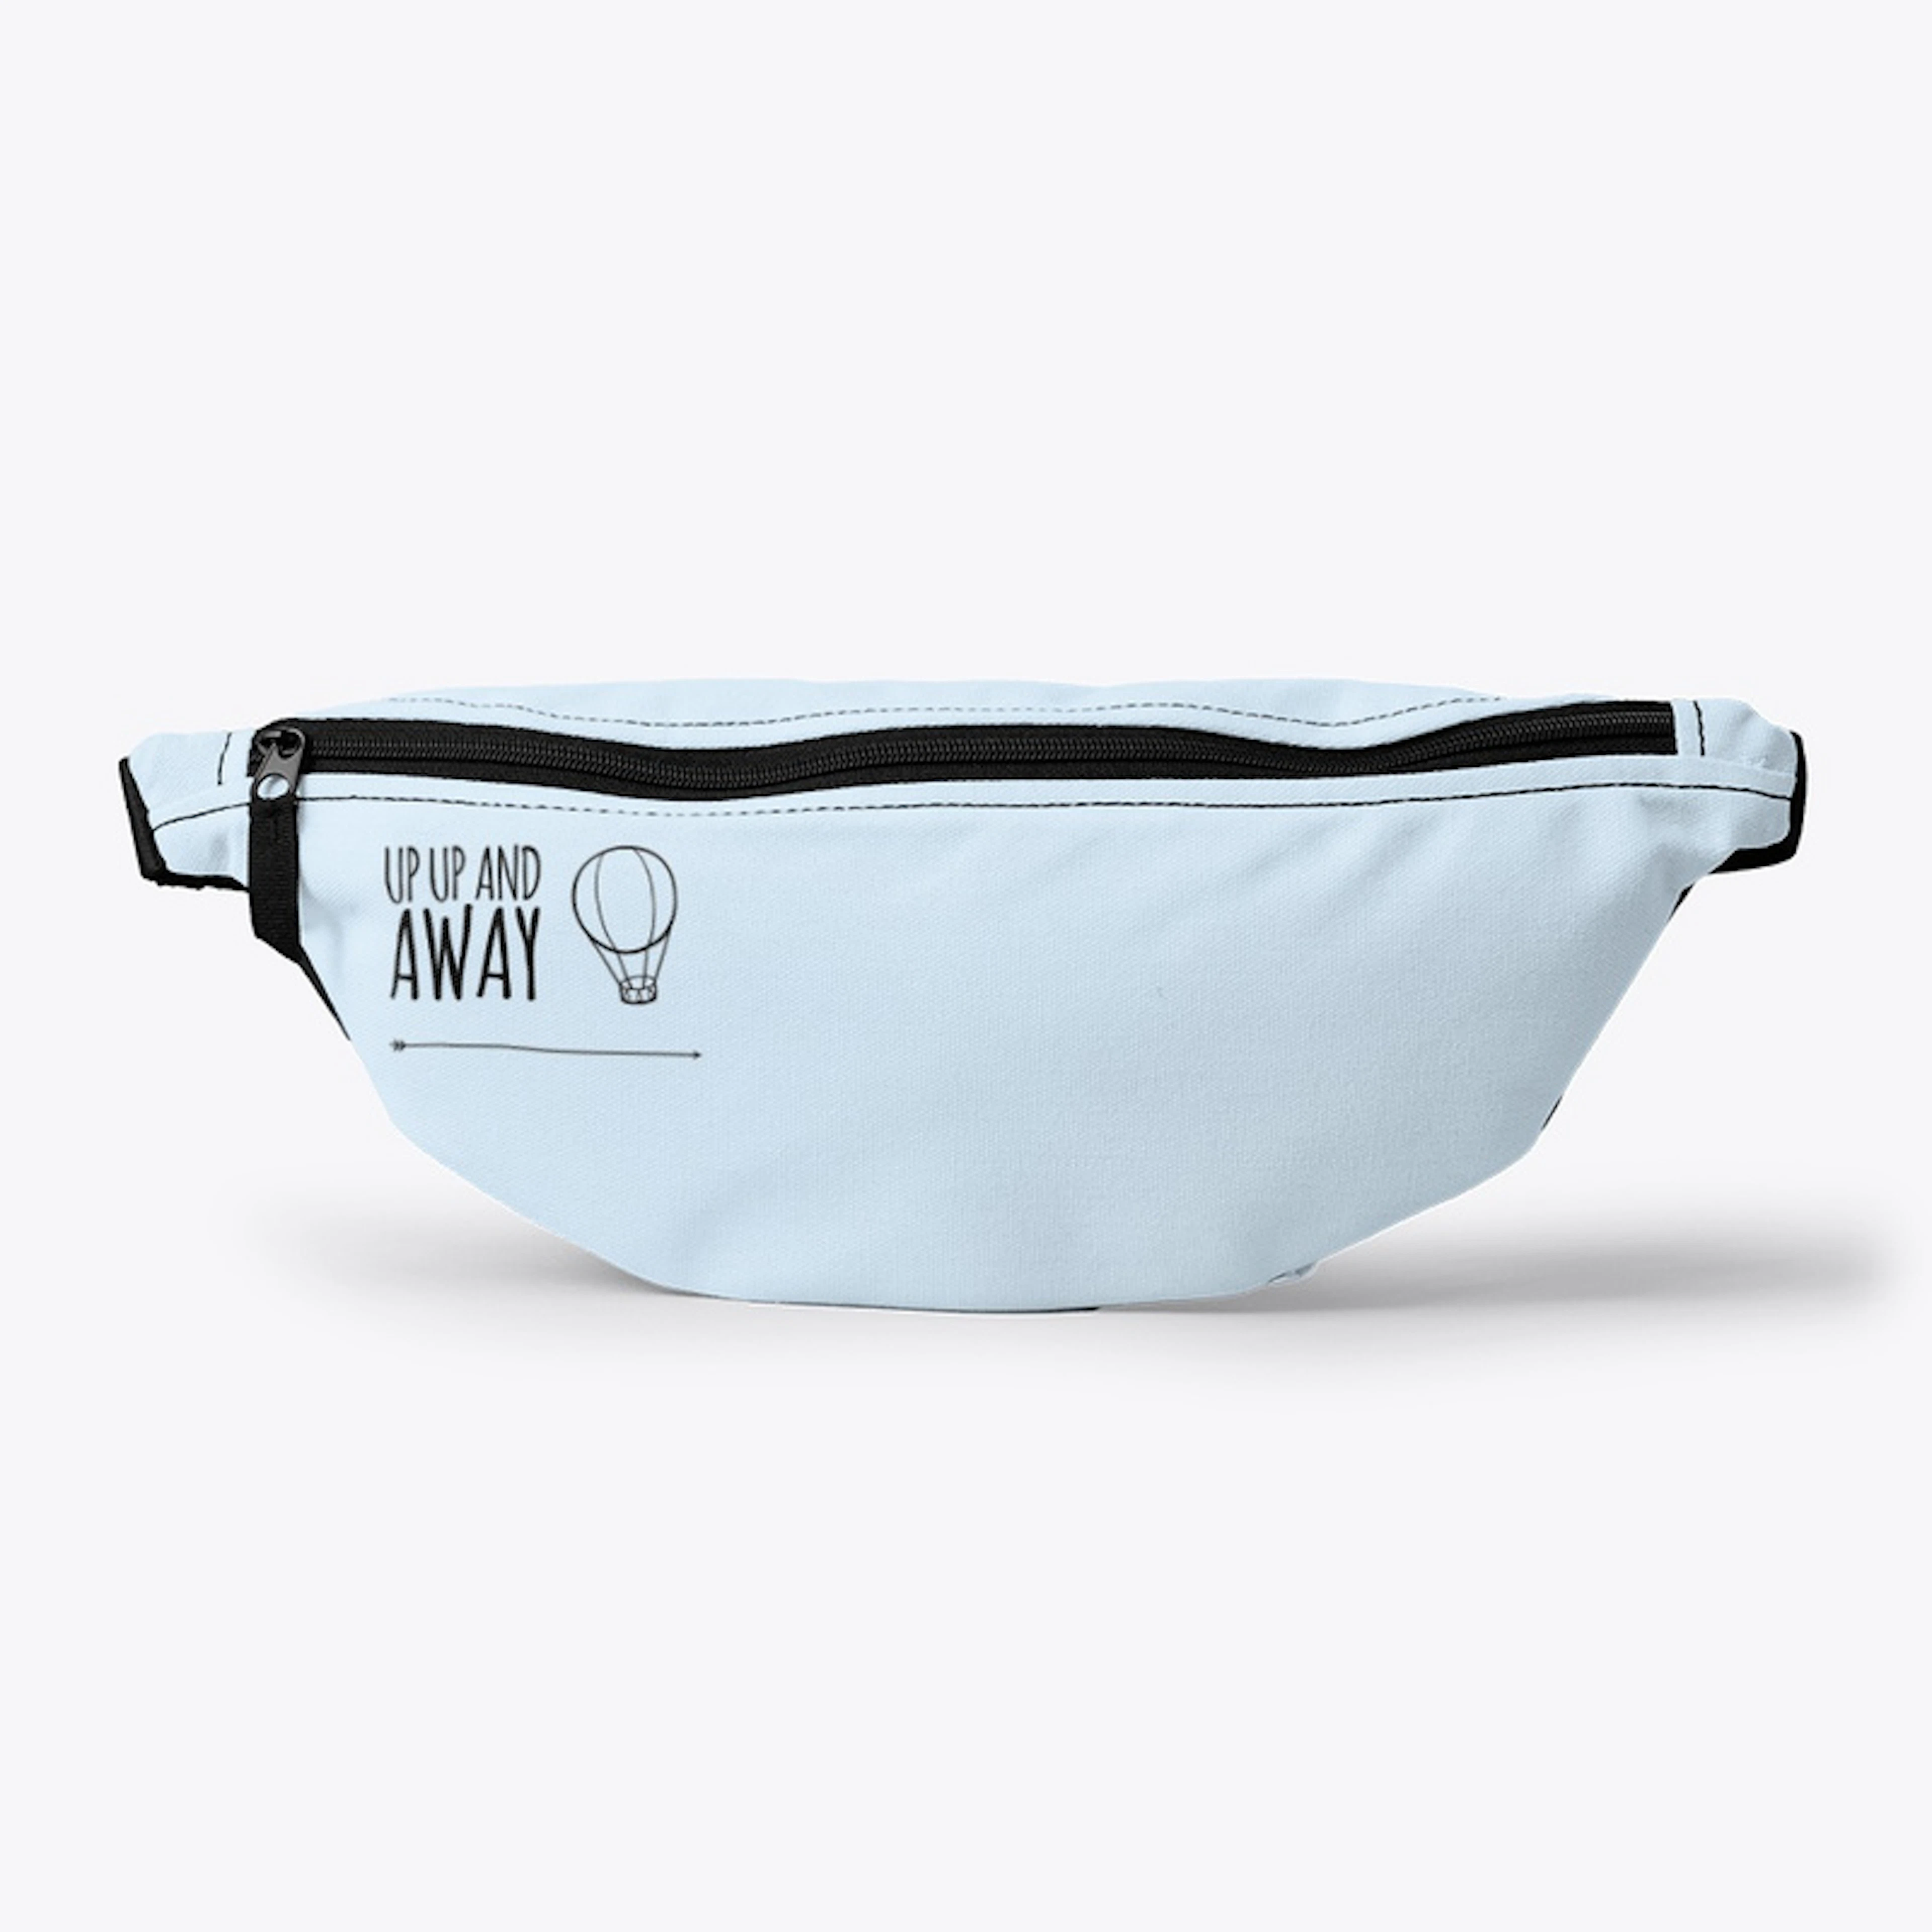 Up Up and Away Fanny Pack